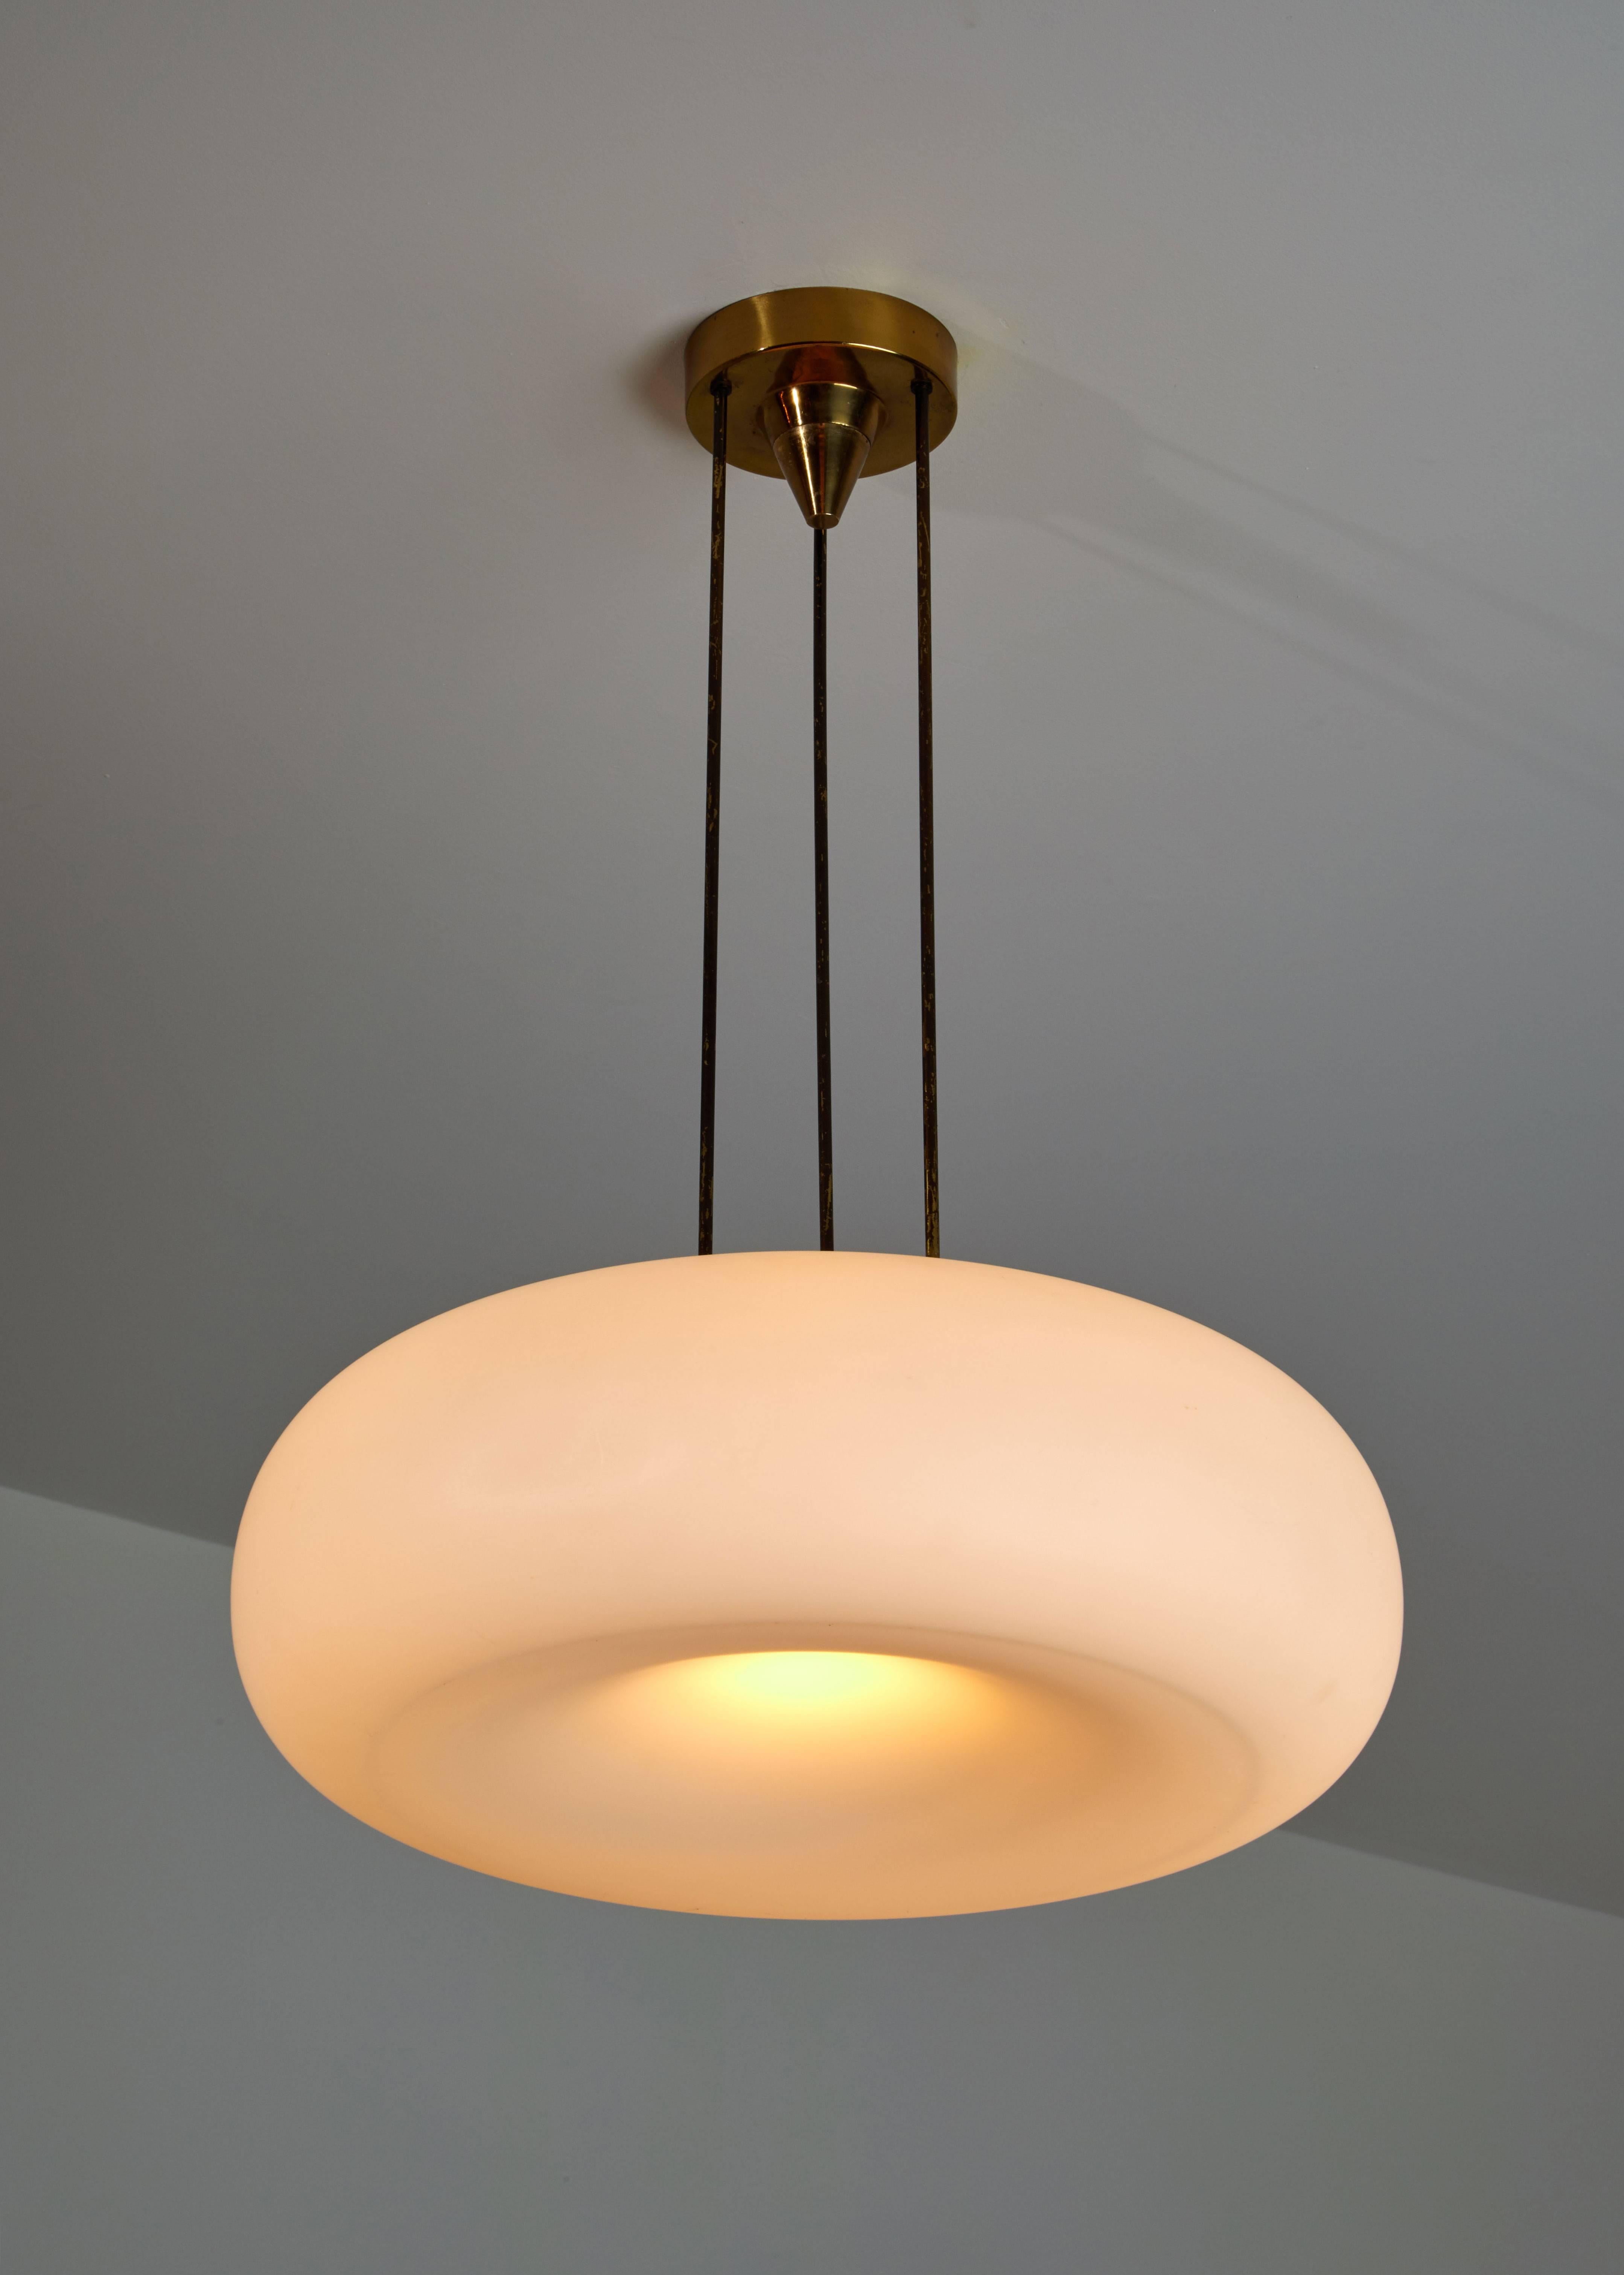 Model 2356 suspension light manufactured by Fontana Arte in Italy, circa 1960s. Original brass canopy, brass hardware, brushed satin opaline glass diffuser. Rewired for US junction boxes. Takes four E12 40w maximum bulbs.